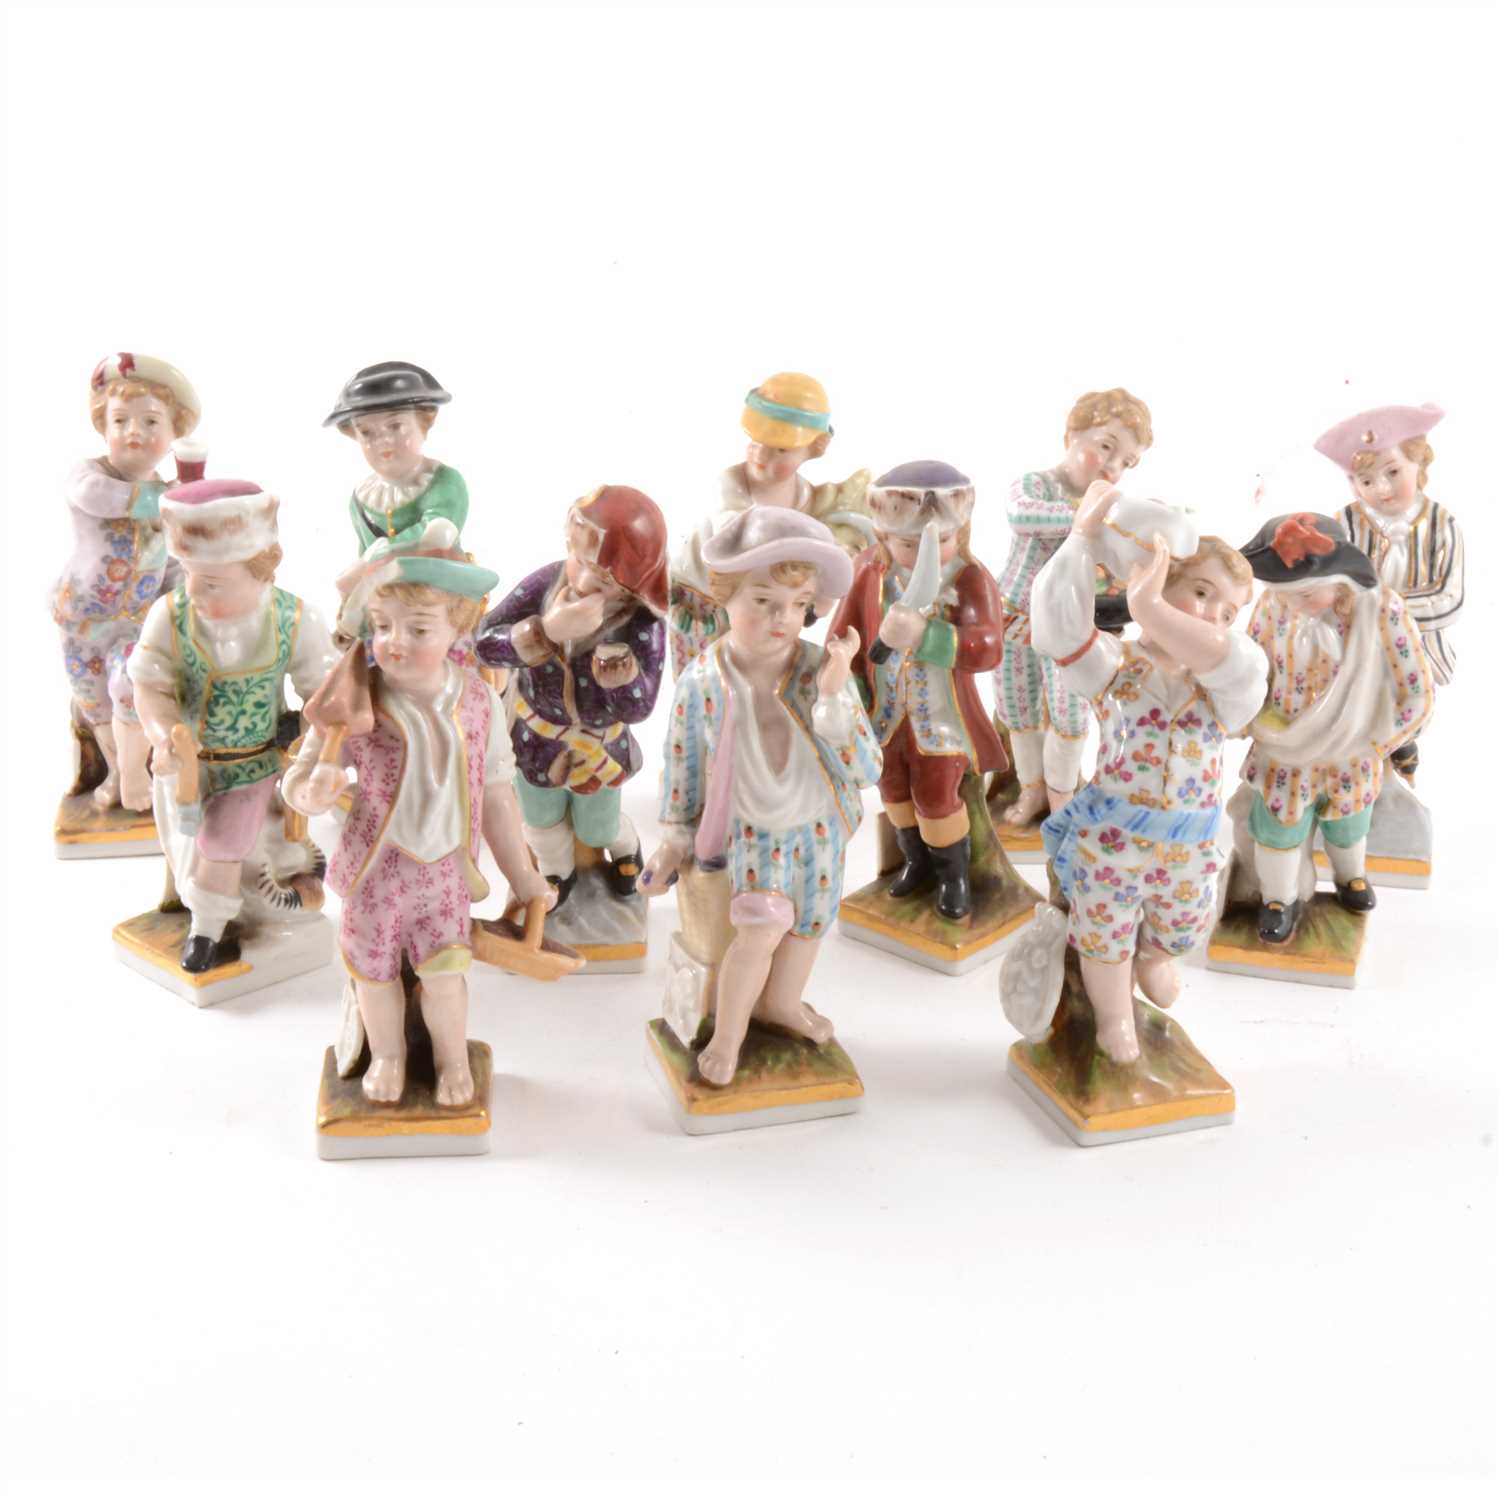 Lot 42 - A set of Dresden figures, Months of the Year, 20th century